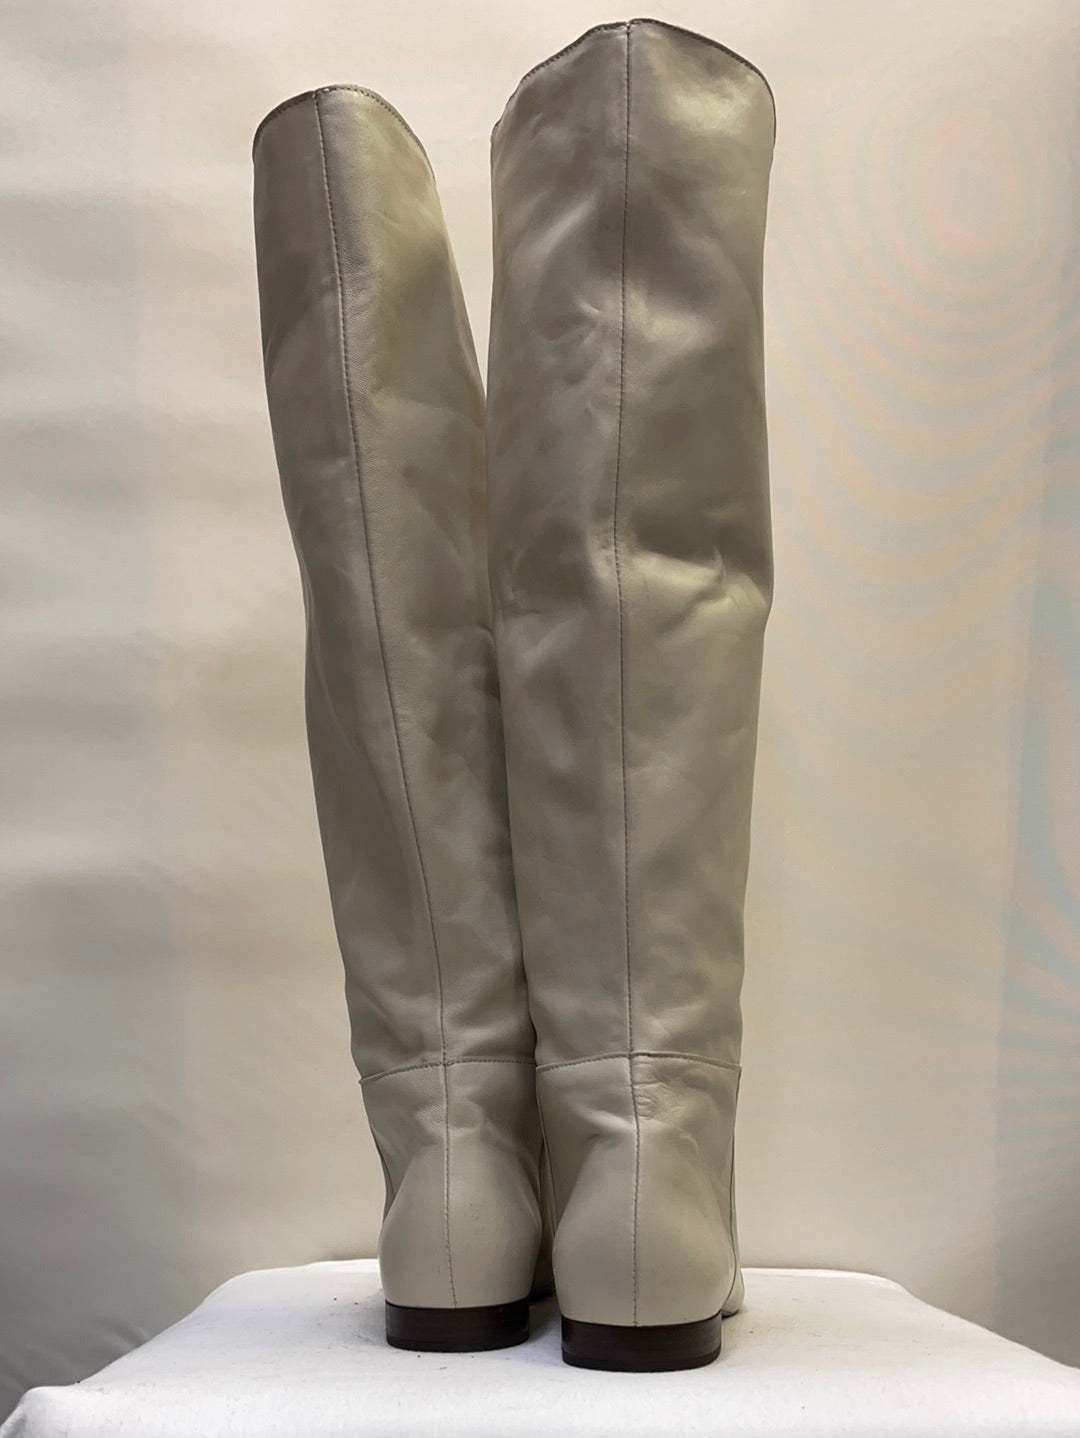 Free People Pointed White Mid-Calf Boot